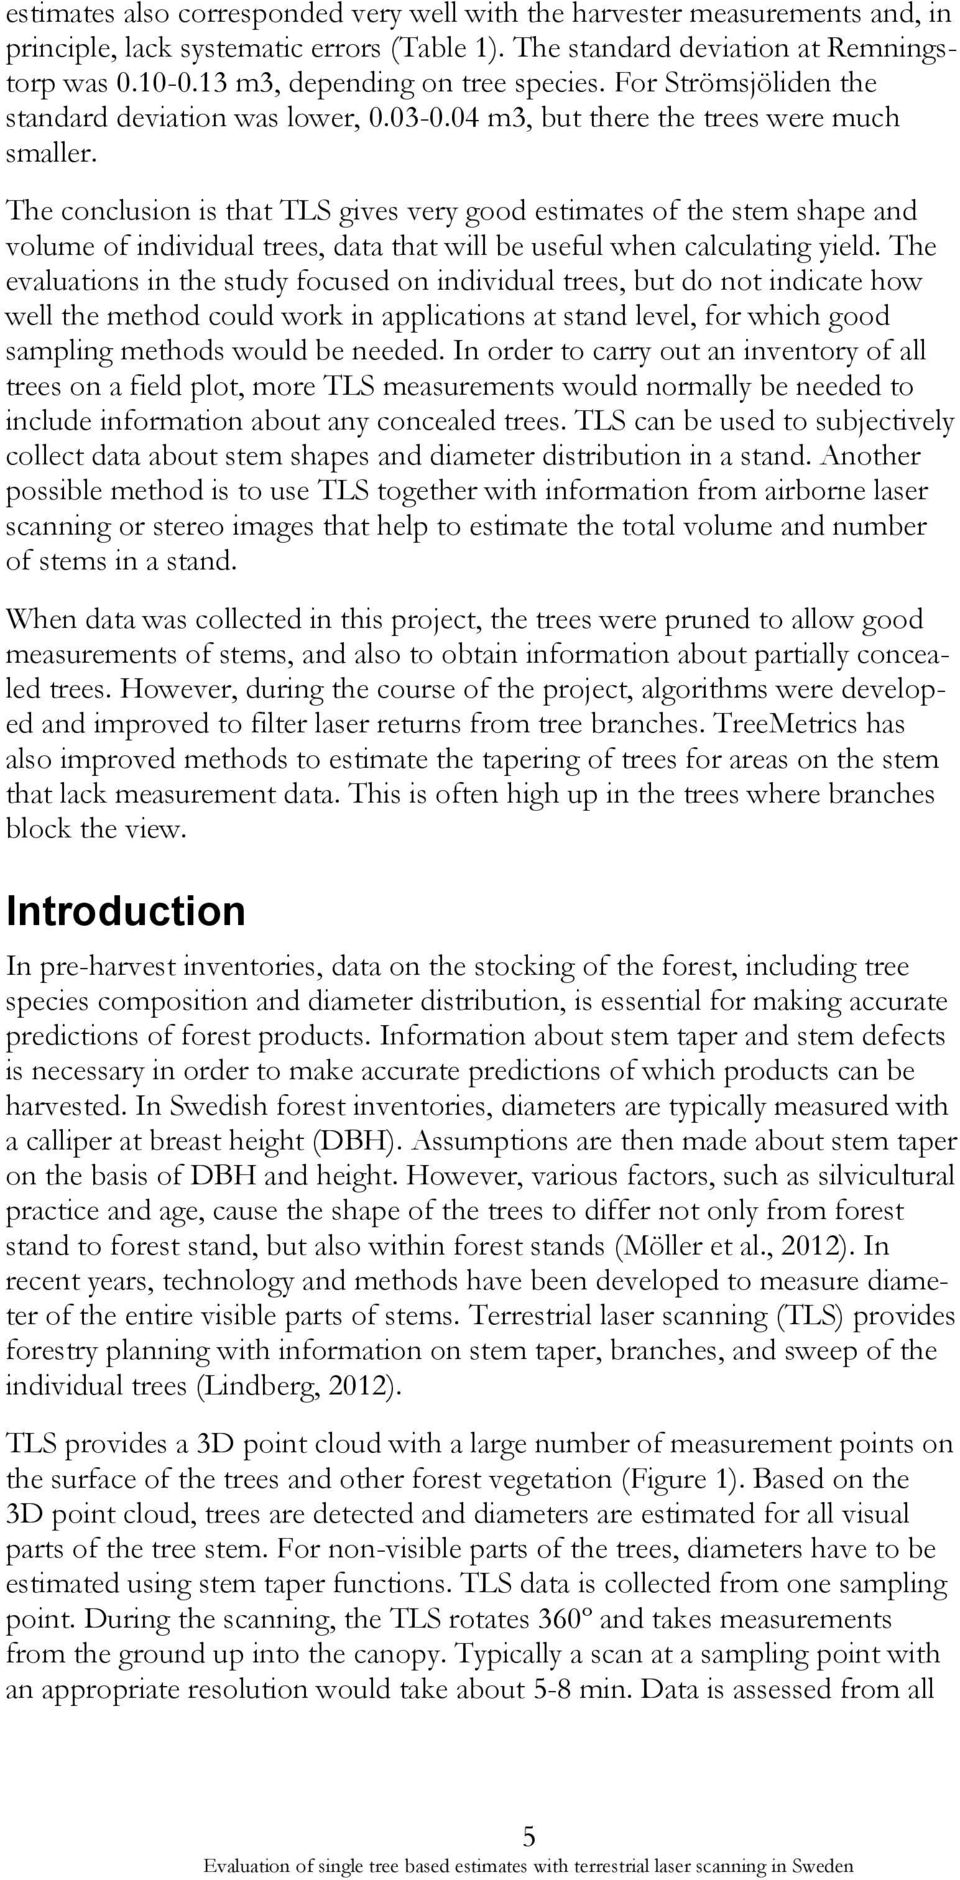 The conclusion is that TLS gives very good estimates of the stem shape and volume of individual trees, data that will be useful when calculating yield.